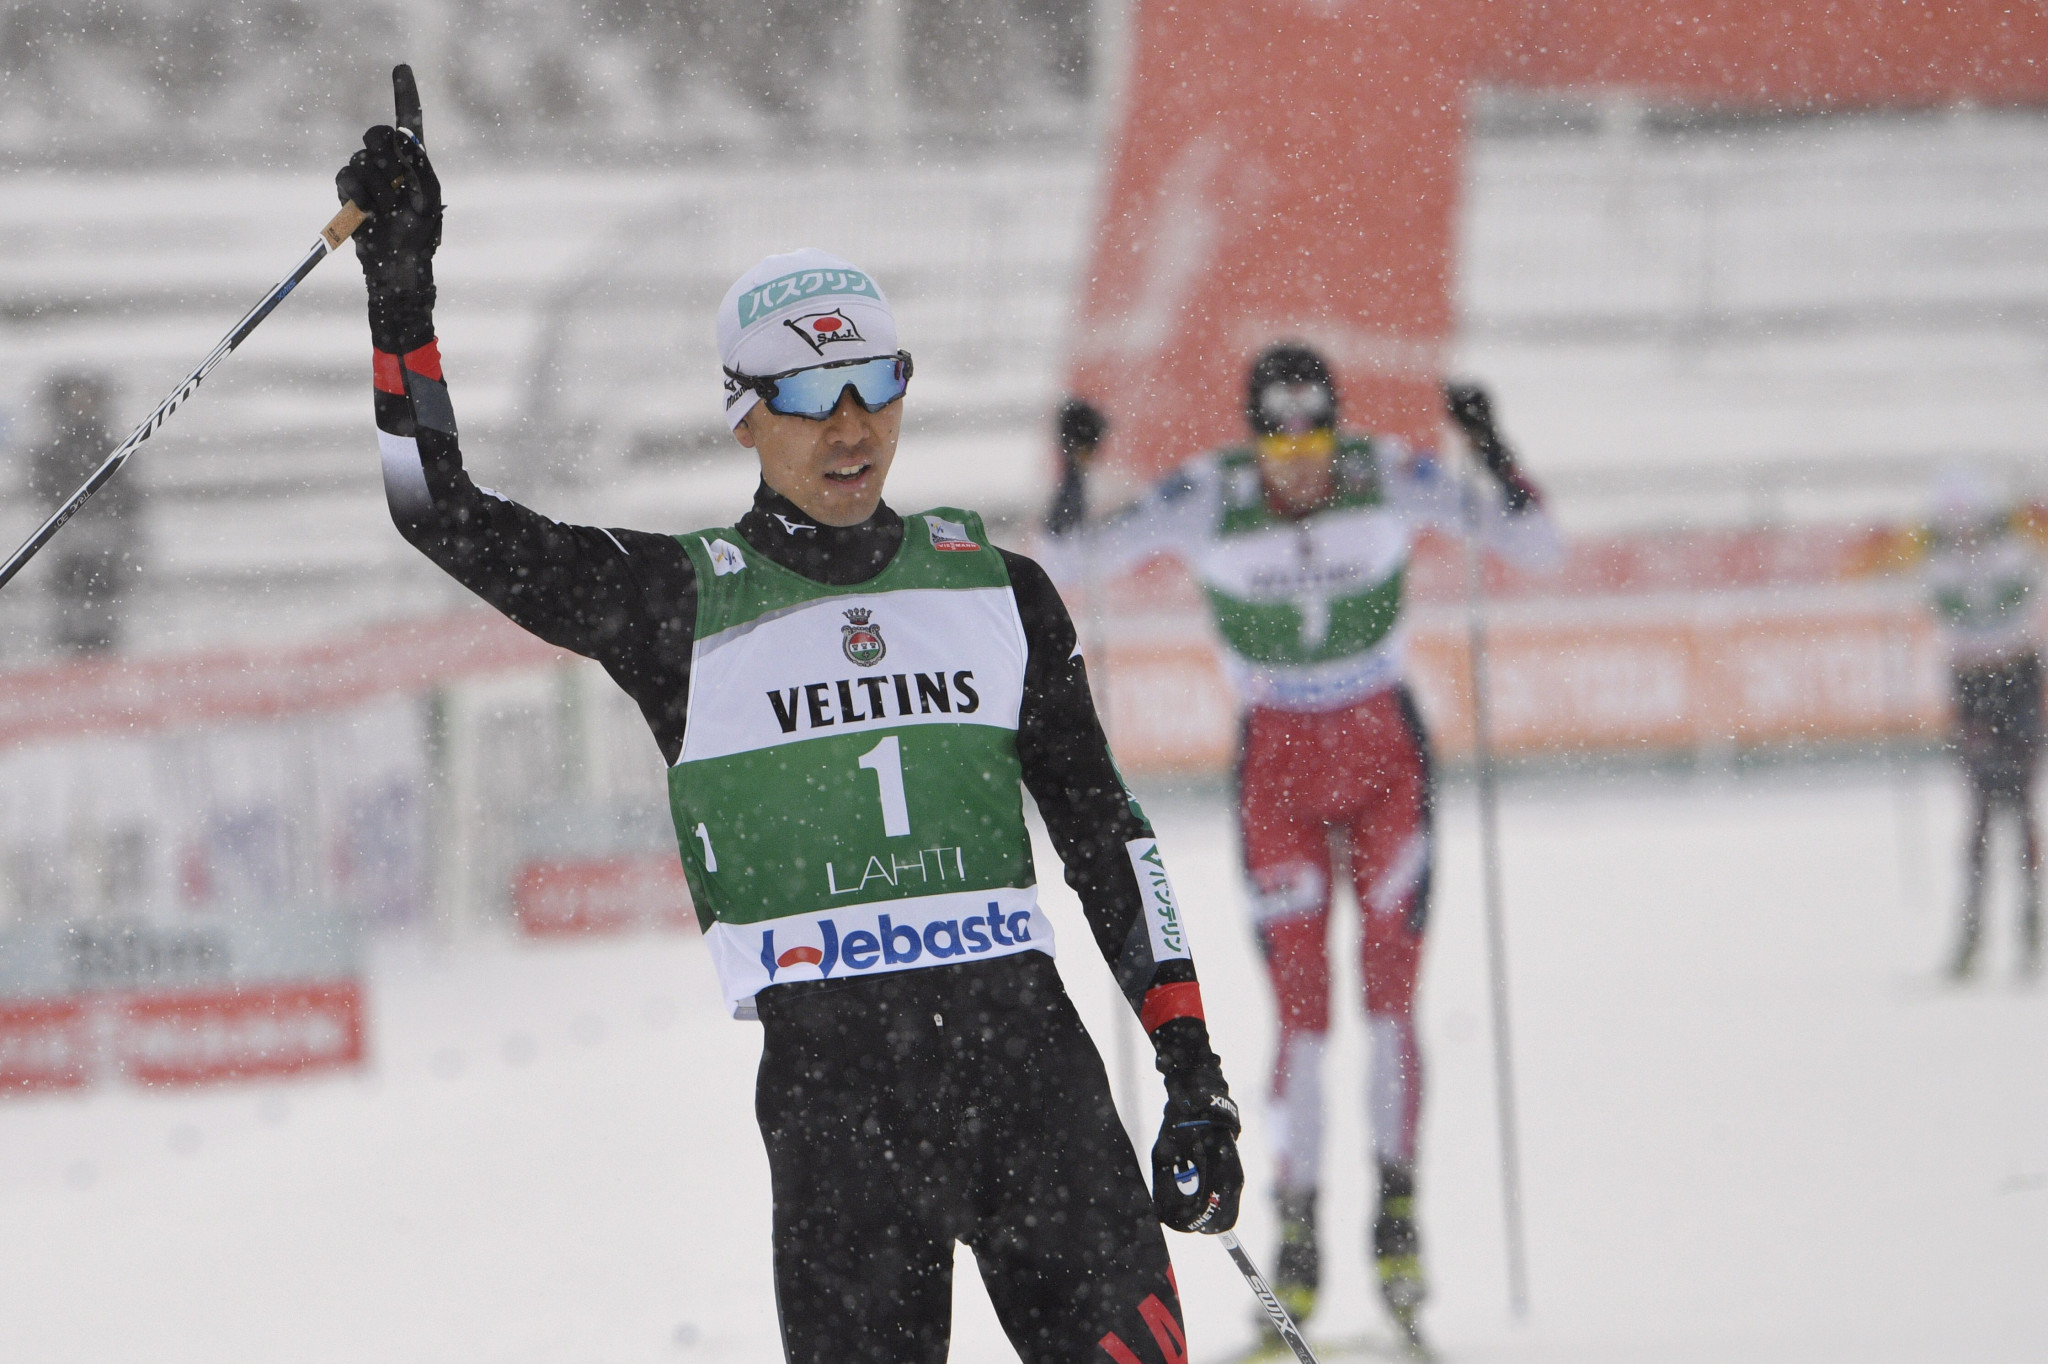 Watabe earns first FIS Nordic Combined World Cup win of season at Lahti as Riiber “curse” continues